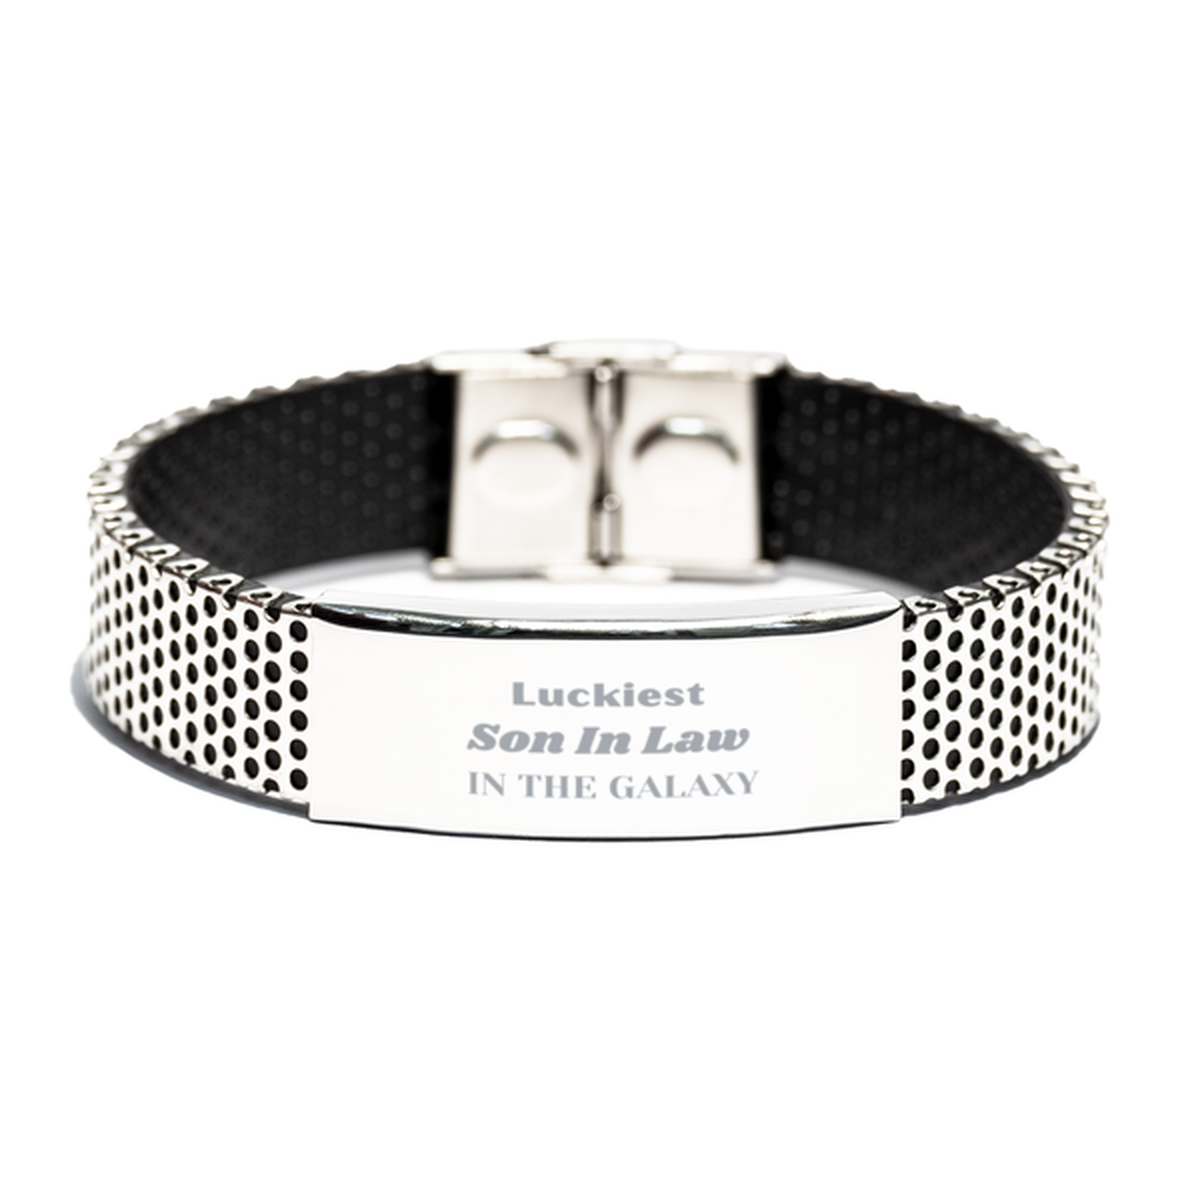 Luckiest Son In Law in the Galaxy, To My Son In Law Engraved Gifts, Christmas Son In Law Stainless Steel Bracelet Gifts, X-mas Birthday Unique Gifts For Son In Law Men Women